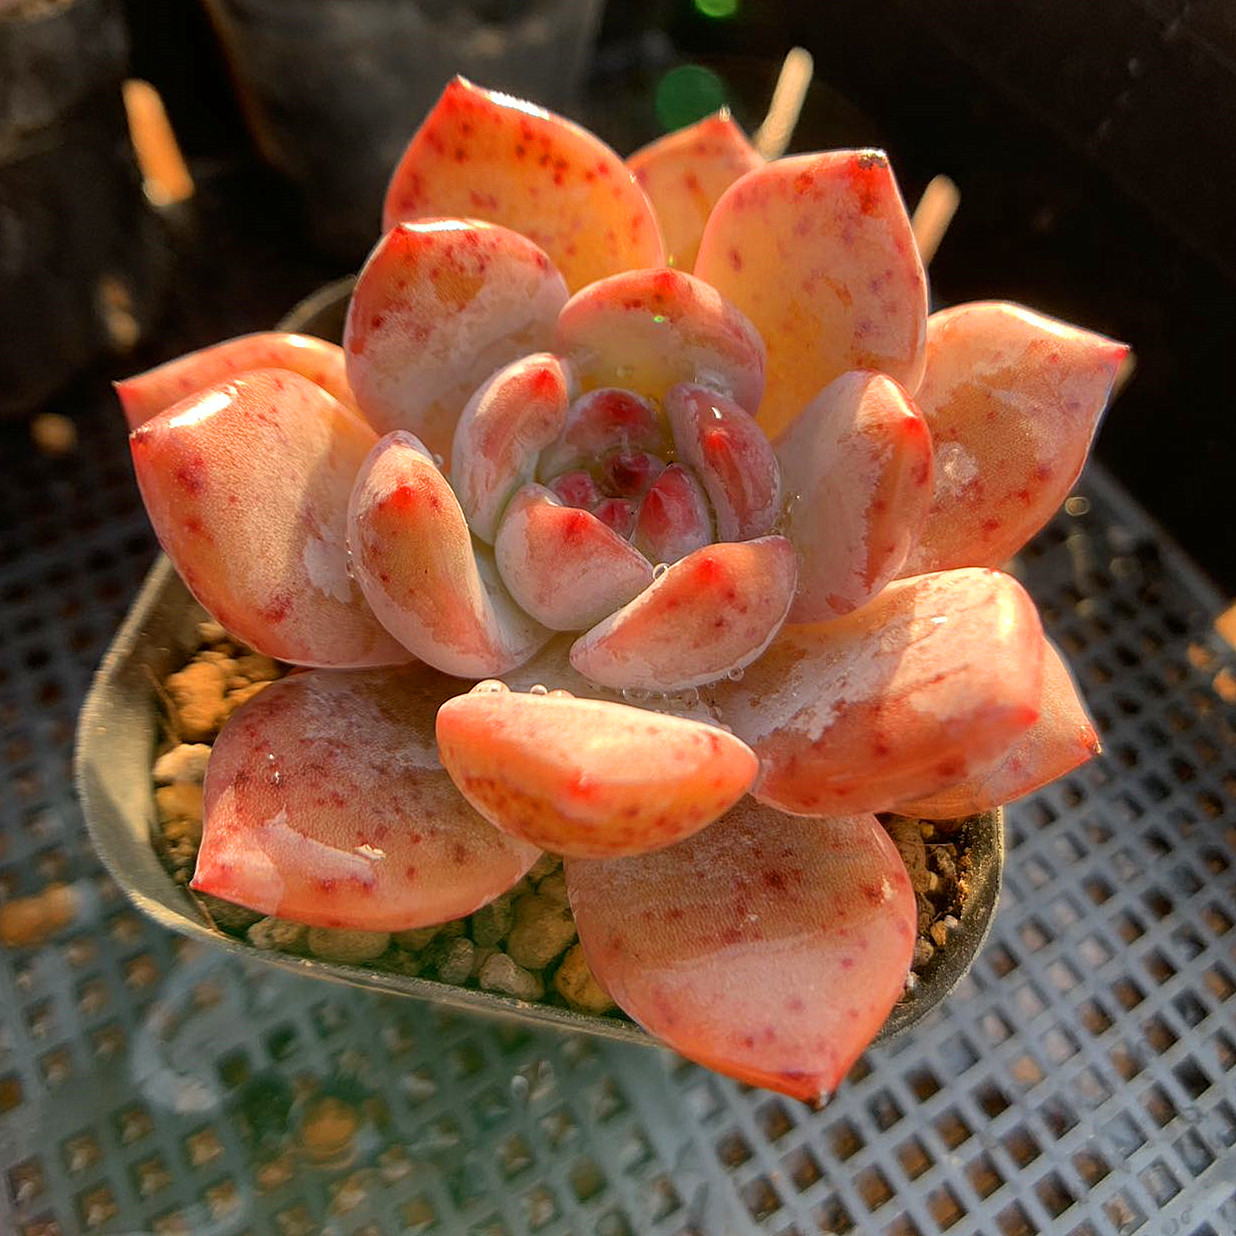  agriculture . direct sale succulent plant ....ekebe rear . orange Monroe beautiful seedling rare pulling out seedling decorative plant interior many meat speciality VERVE